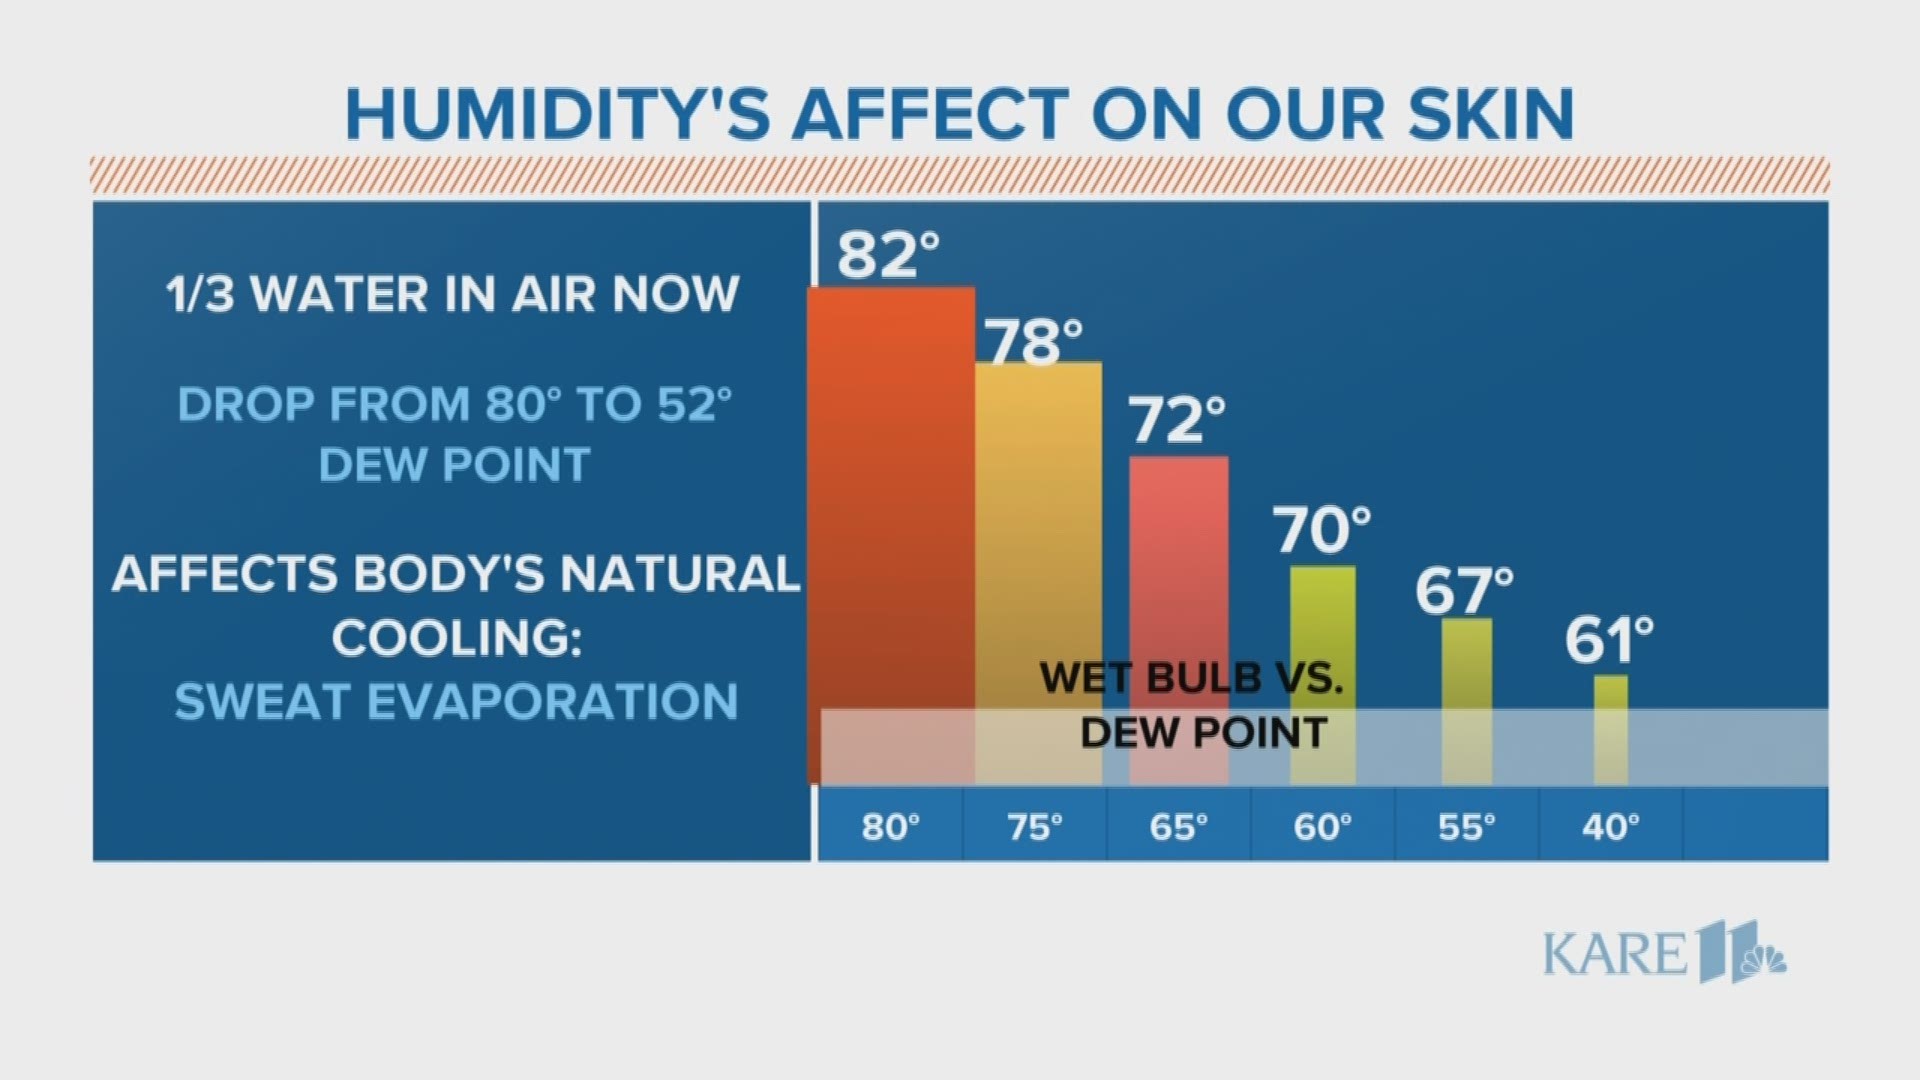 The humidity we experienced last week feels miserable, but it also has a detrimental impact on the human body. Sven explains.